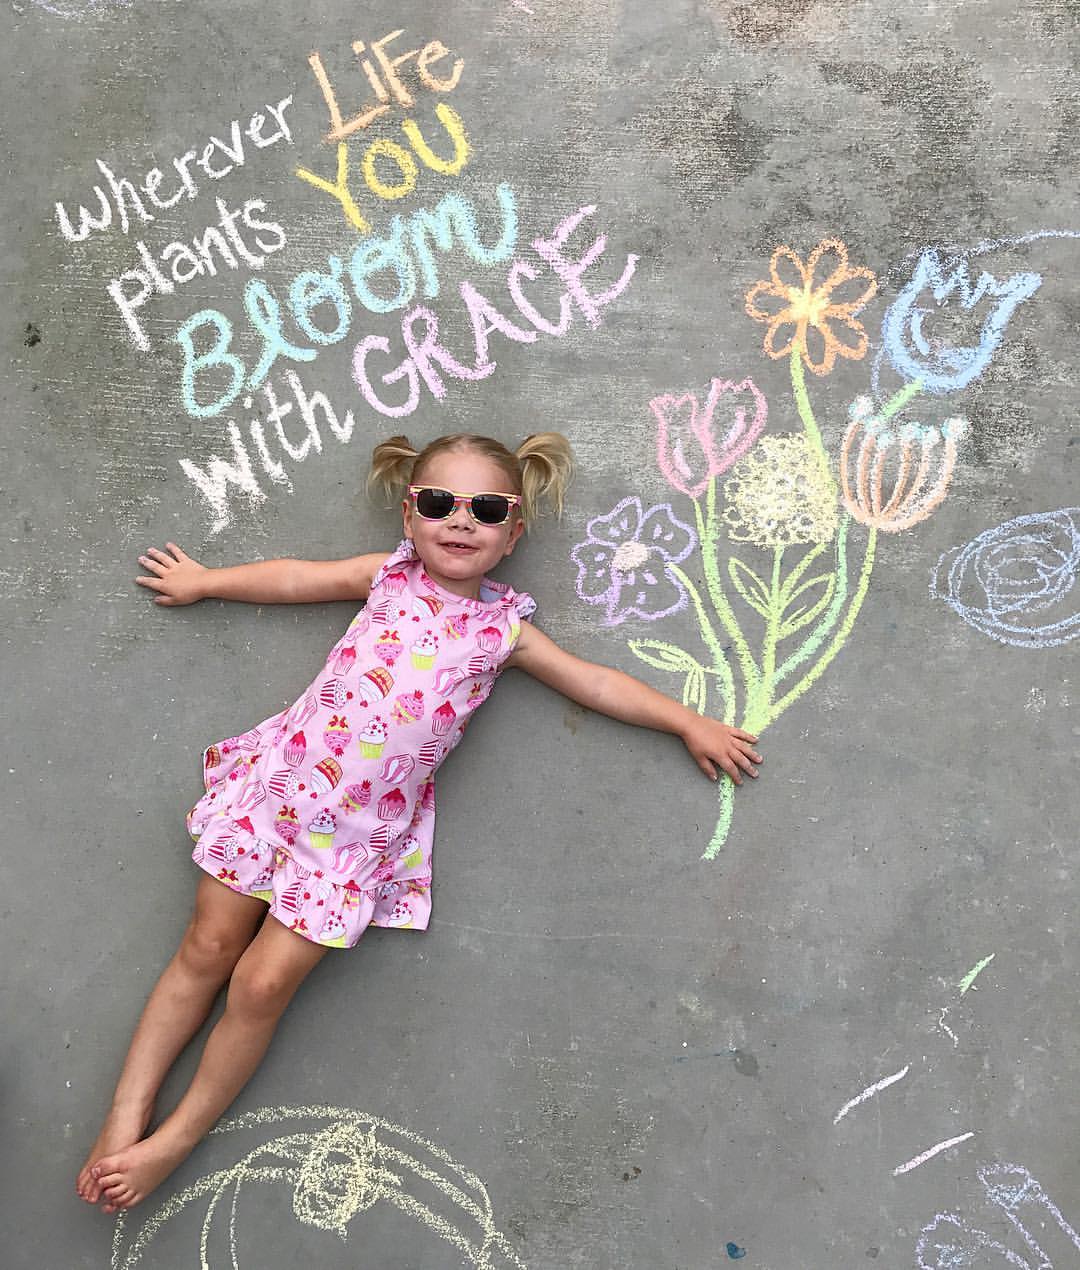 cute sidewalk chalk pictures of smiling girl